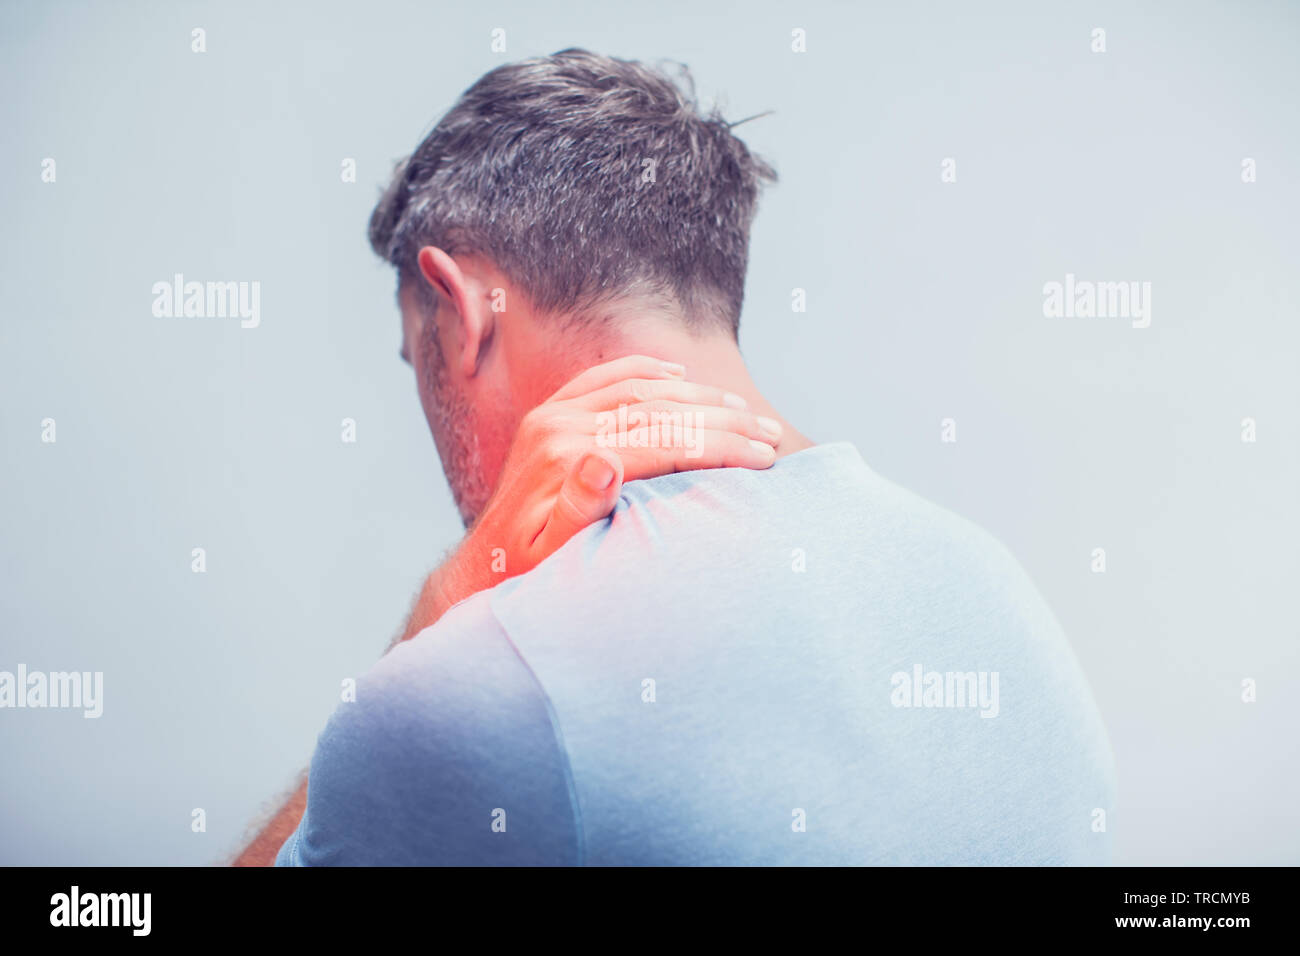 People, healthcare and problem concept - close up of man suffering from neck pain over gray background Stock Photo